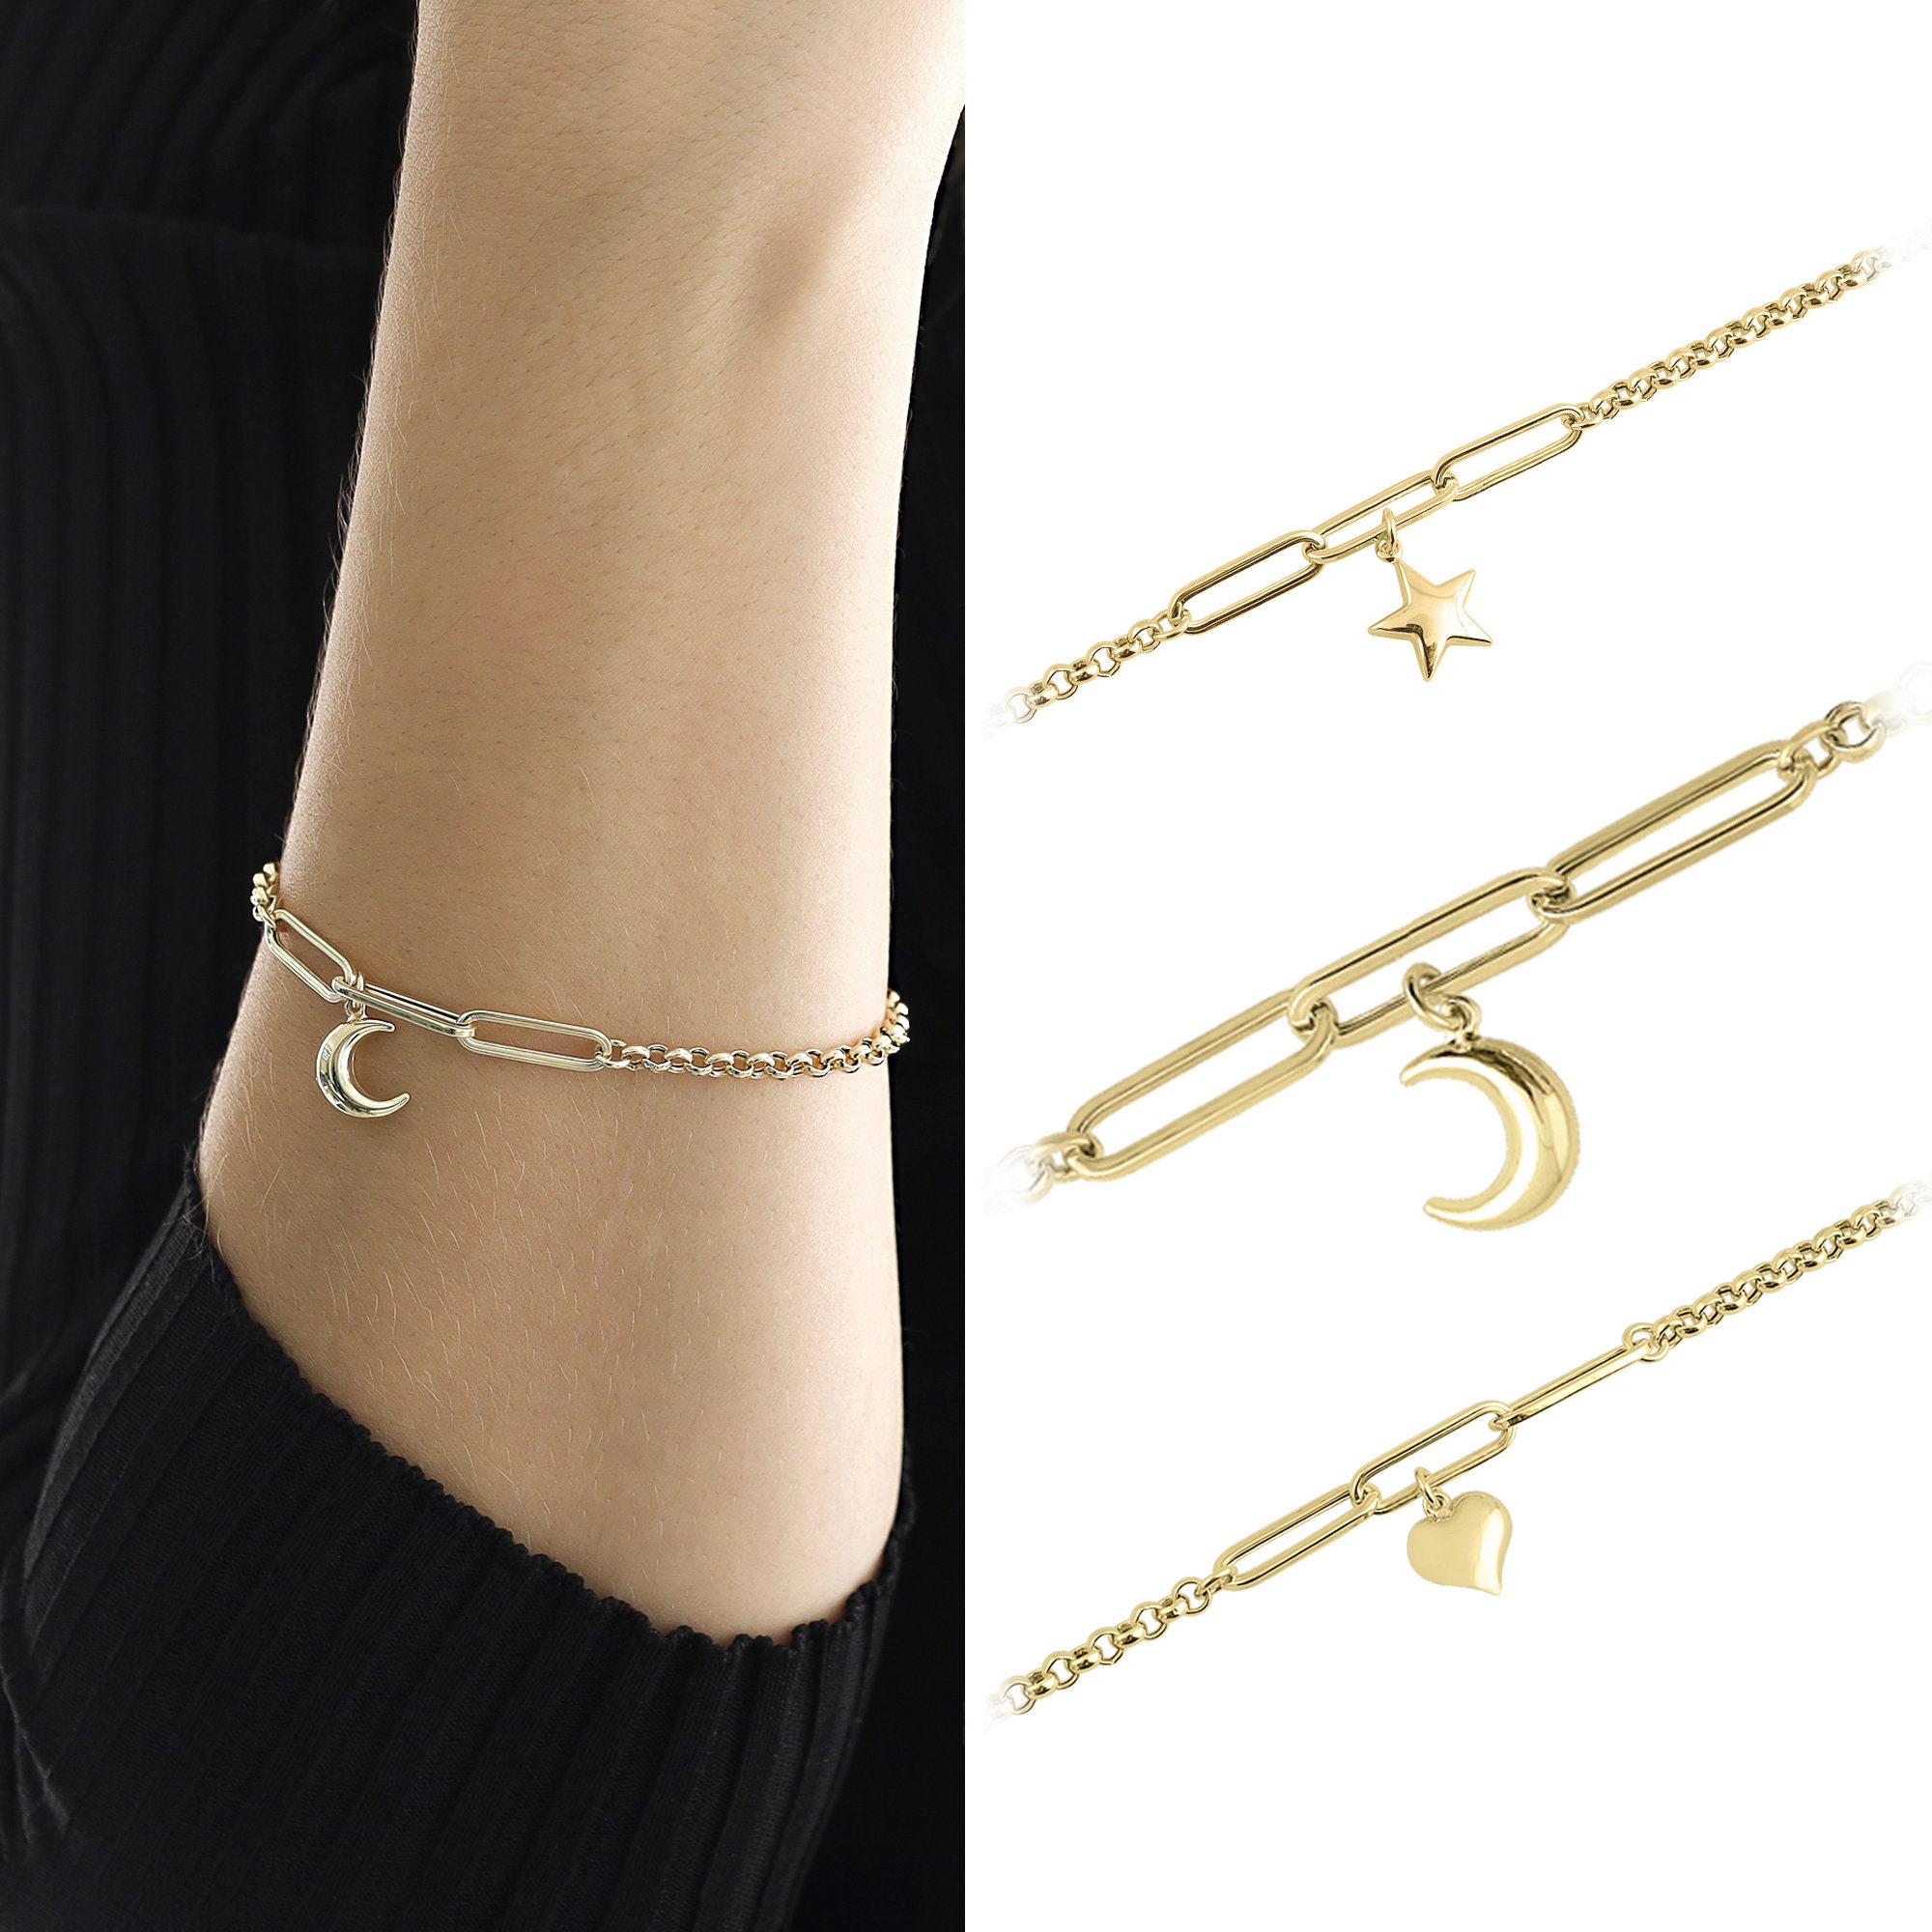 14K Gold Rolo Link & Paperclip Bracelet w/ Star Charm | Double Chain Handmade Dainty Bracelet, Everyday Fine Jewelry, Christmas Gift for Her